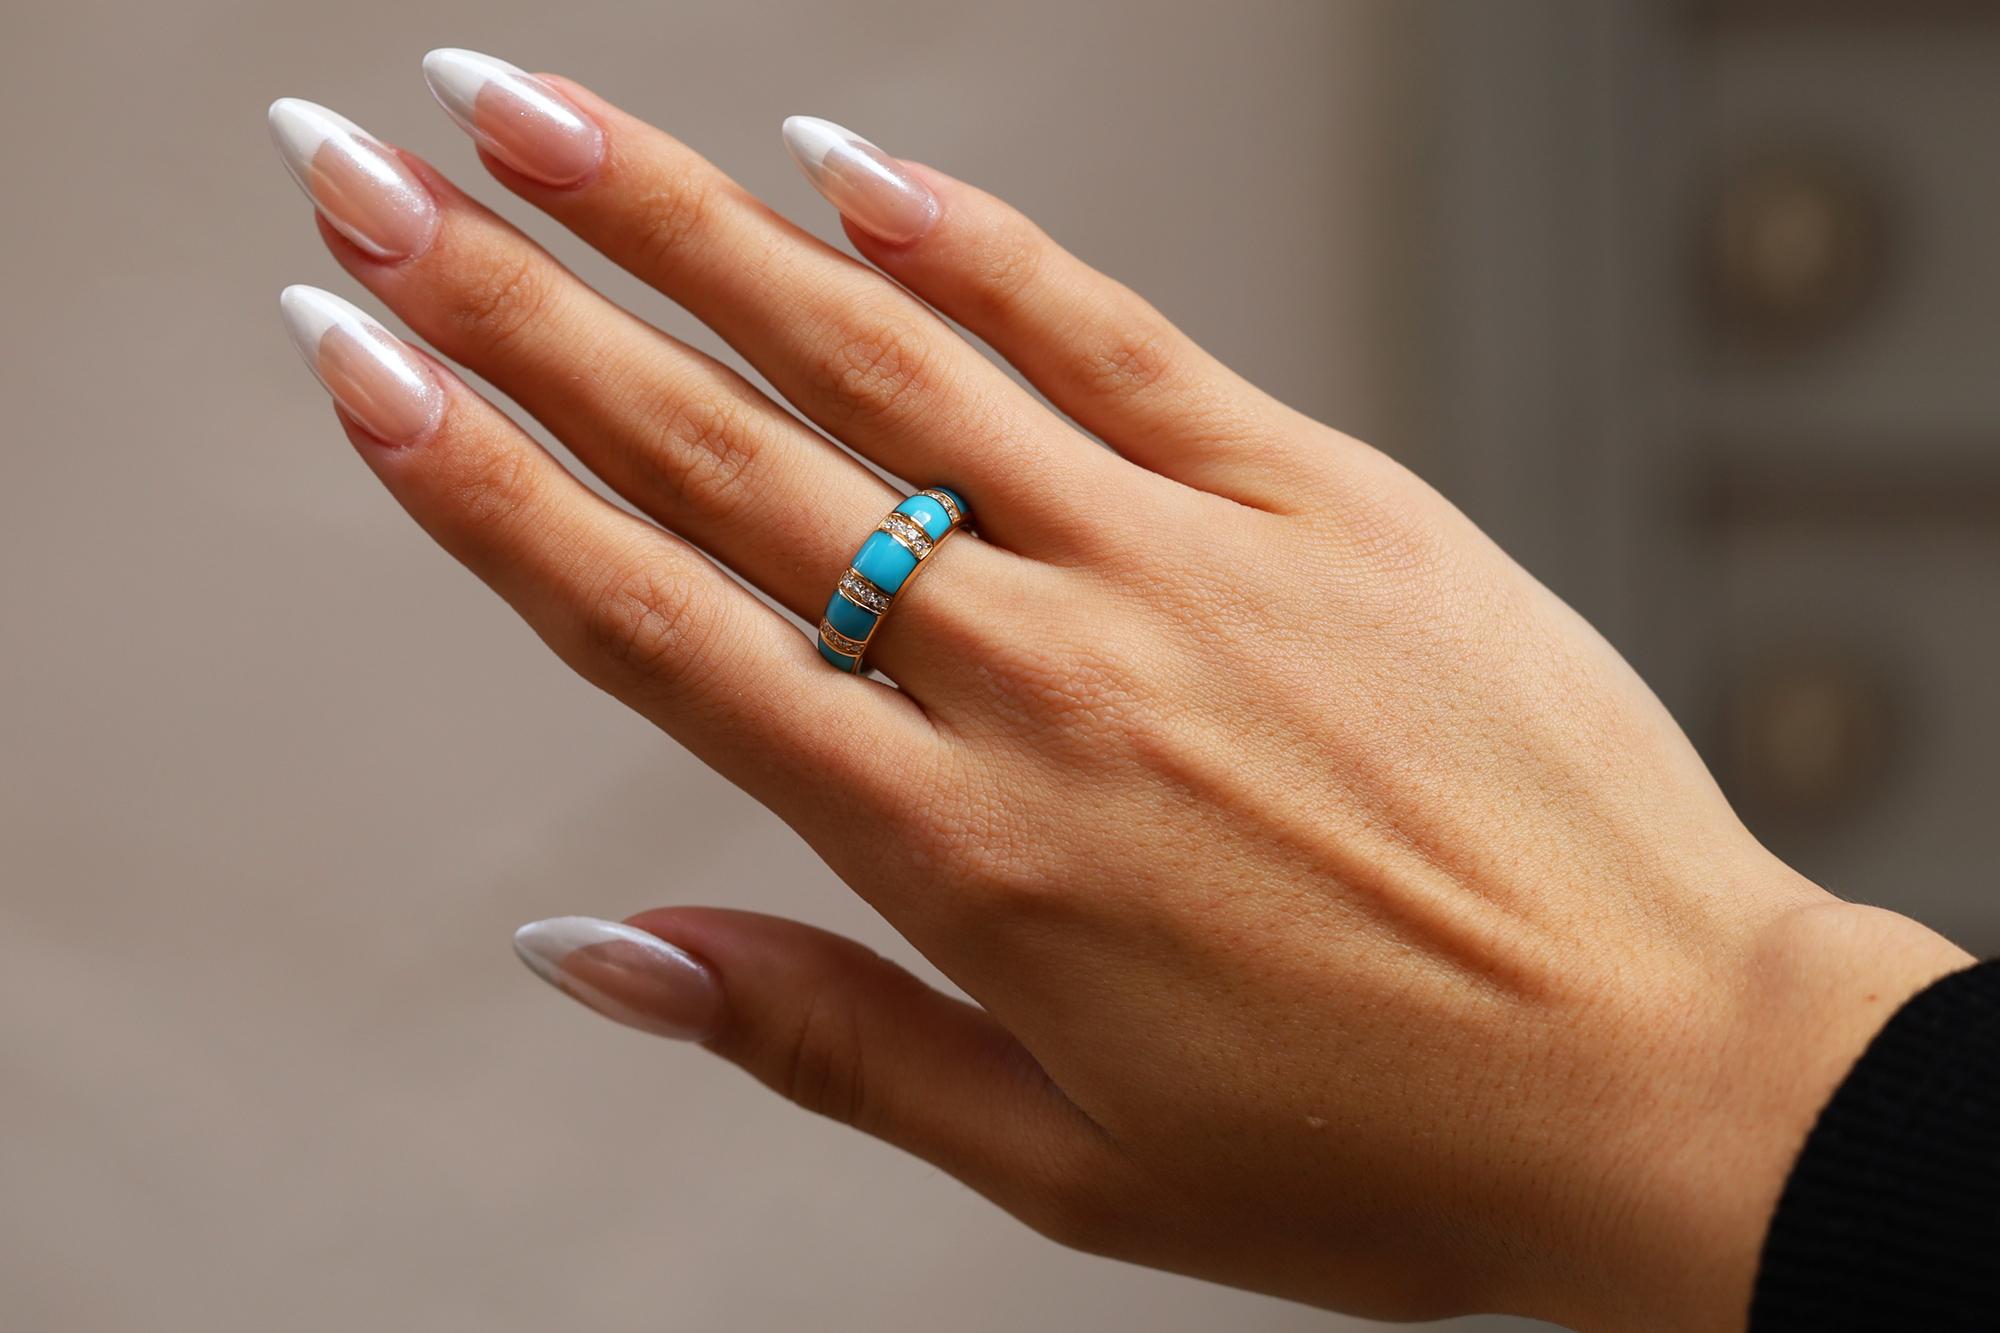 A wedding band or stacking ring to be worn with joy and pride, this sleek, sleeping beauty turquoise band is a must have accessory. Created by Kabana, renowned for their fabulous gemstone inlay work in rich 14k yellow gold and brilliant diamonds.